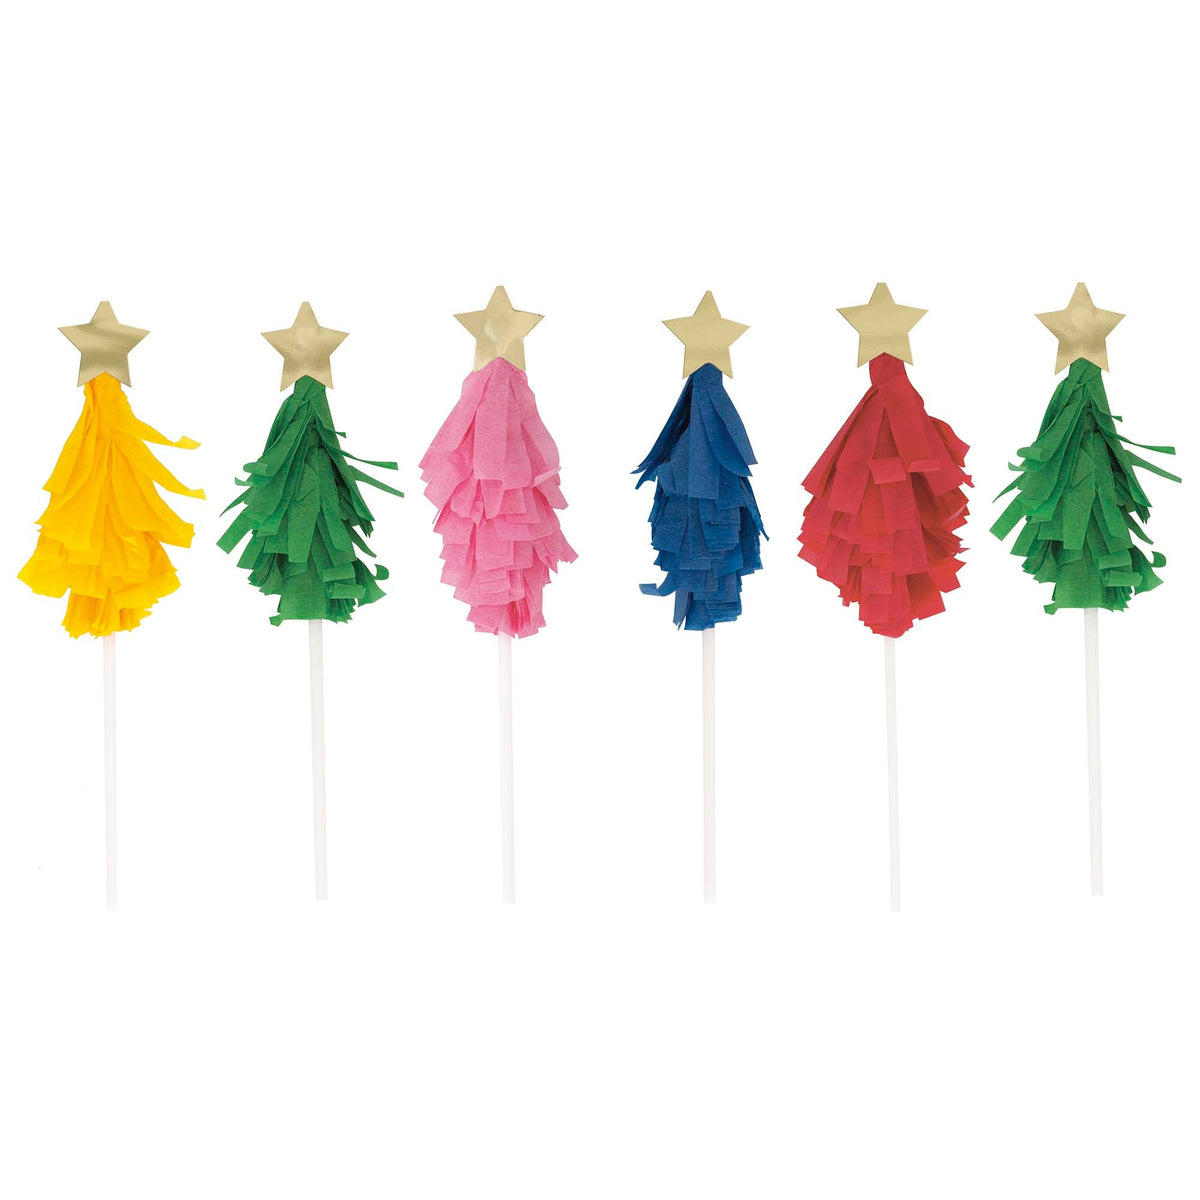 UNIQUE PARTY FAVORS Christmas Vibrant Christmas Cake Toppers, 6 Count